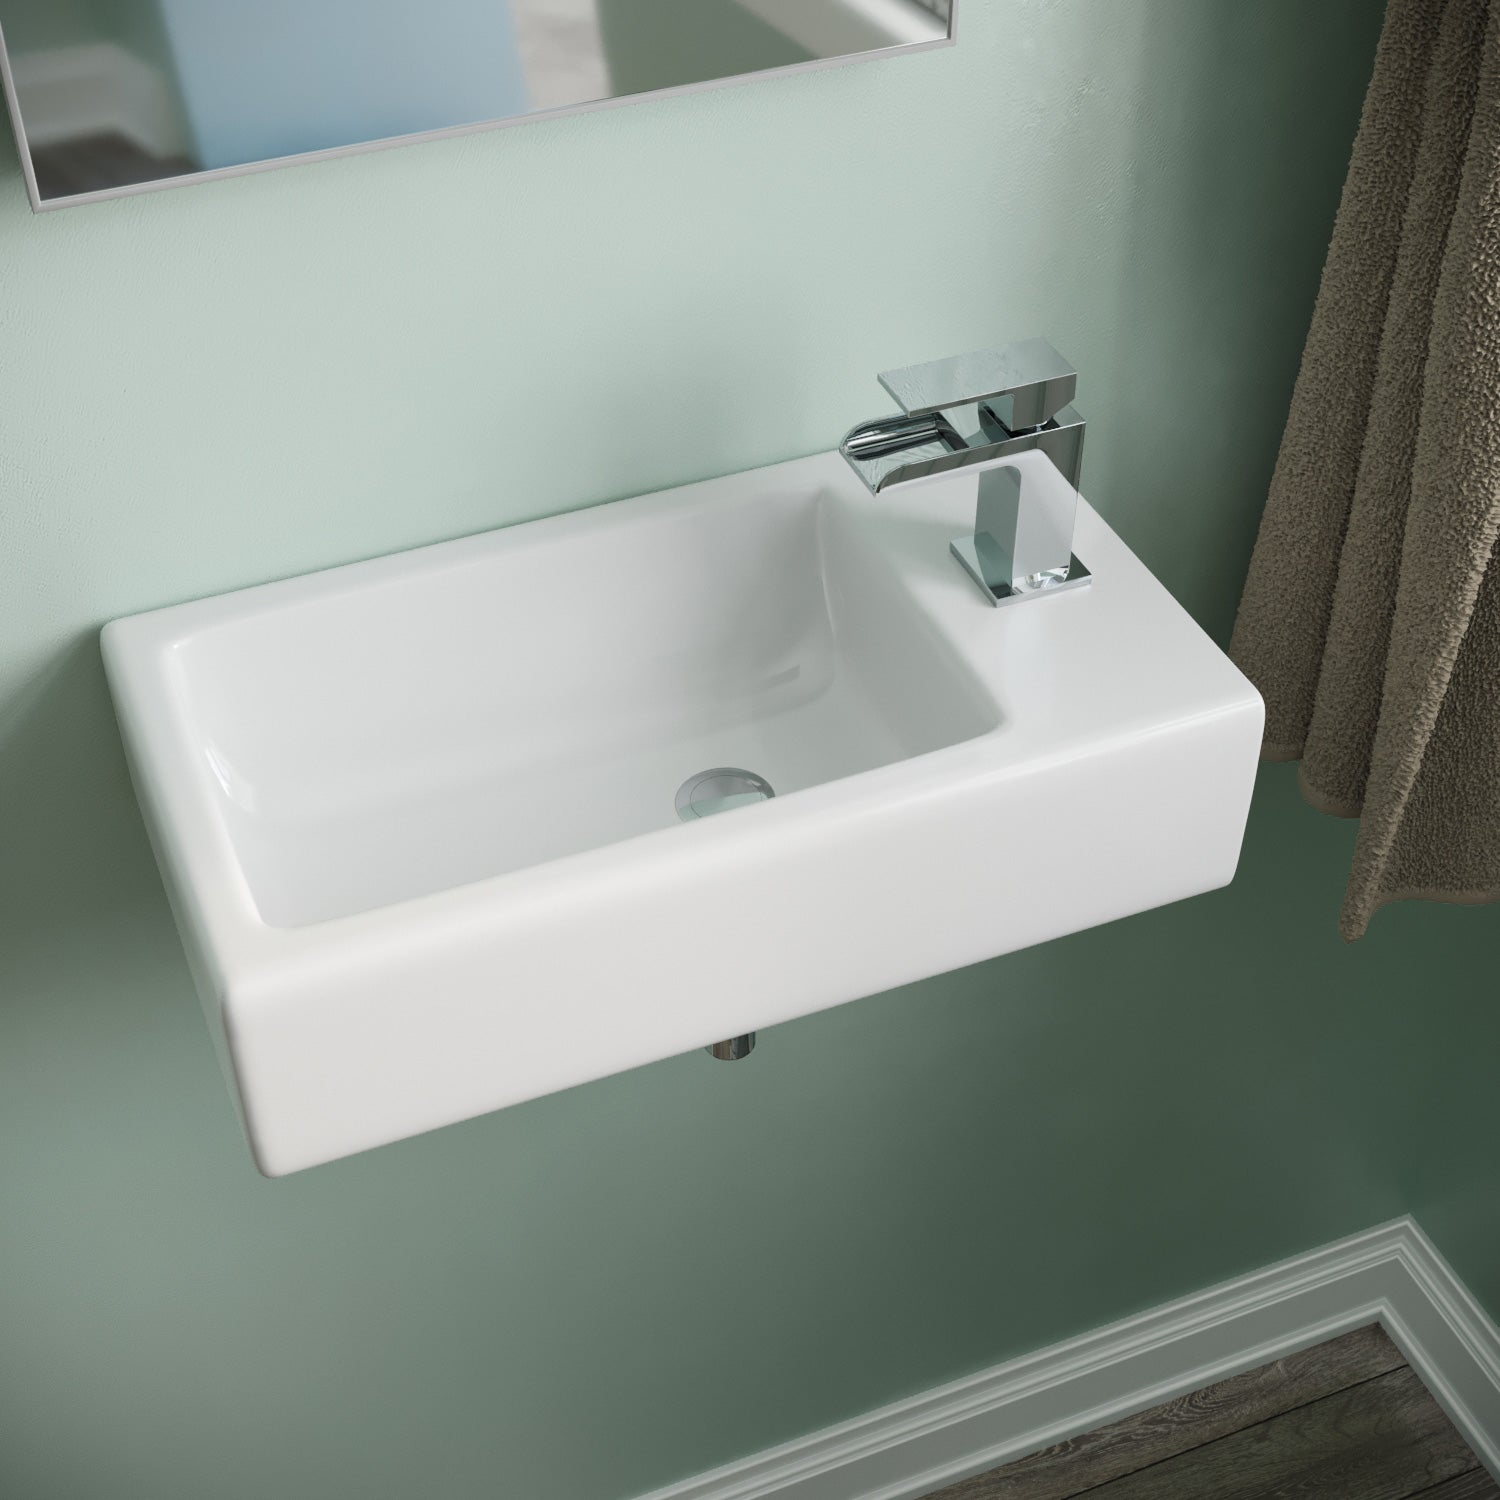 Tulla 455 x 250mm Large Rectangle Wall Hung Cloakroom Basin Sink